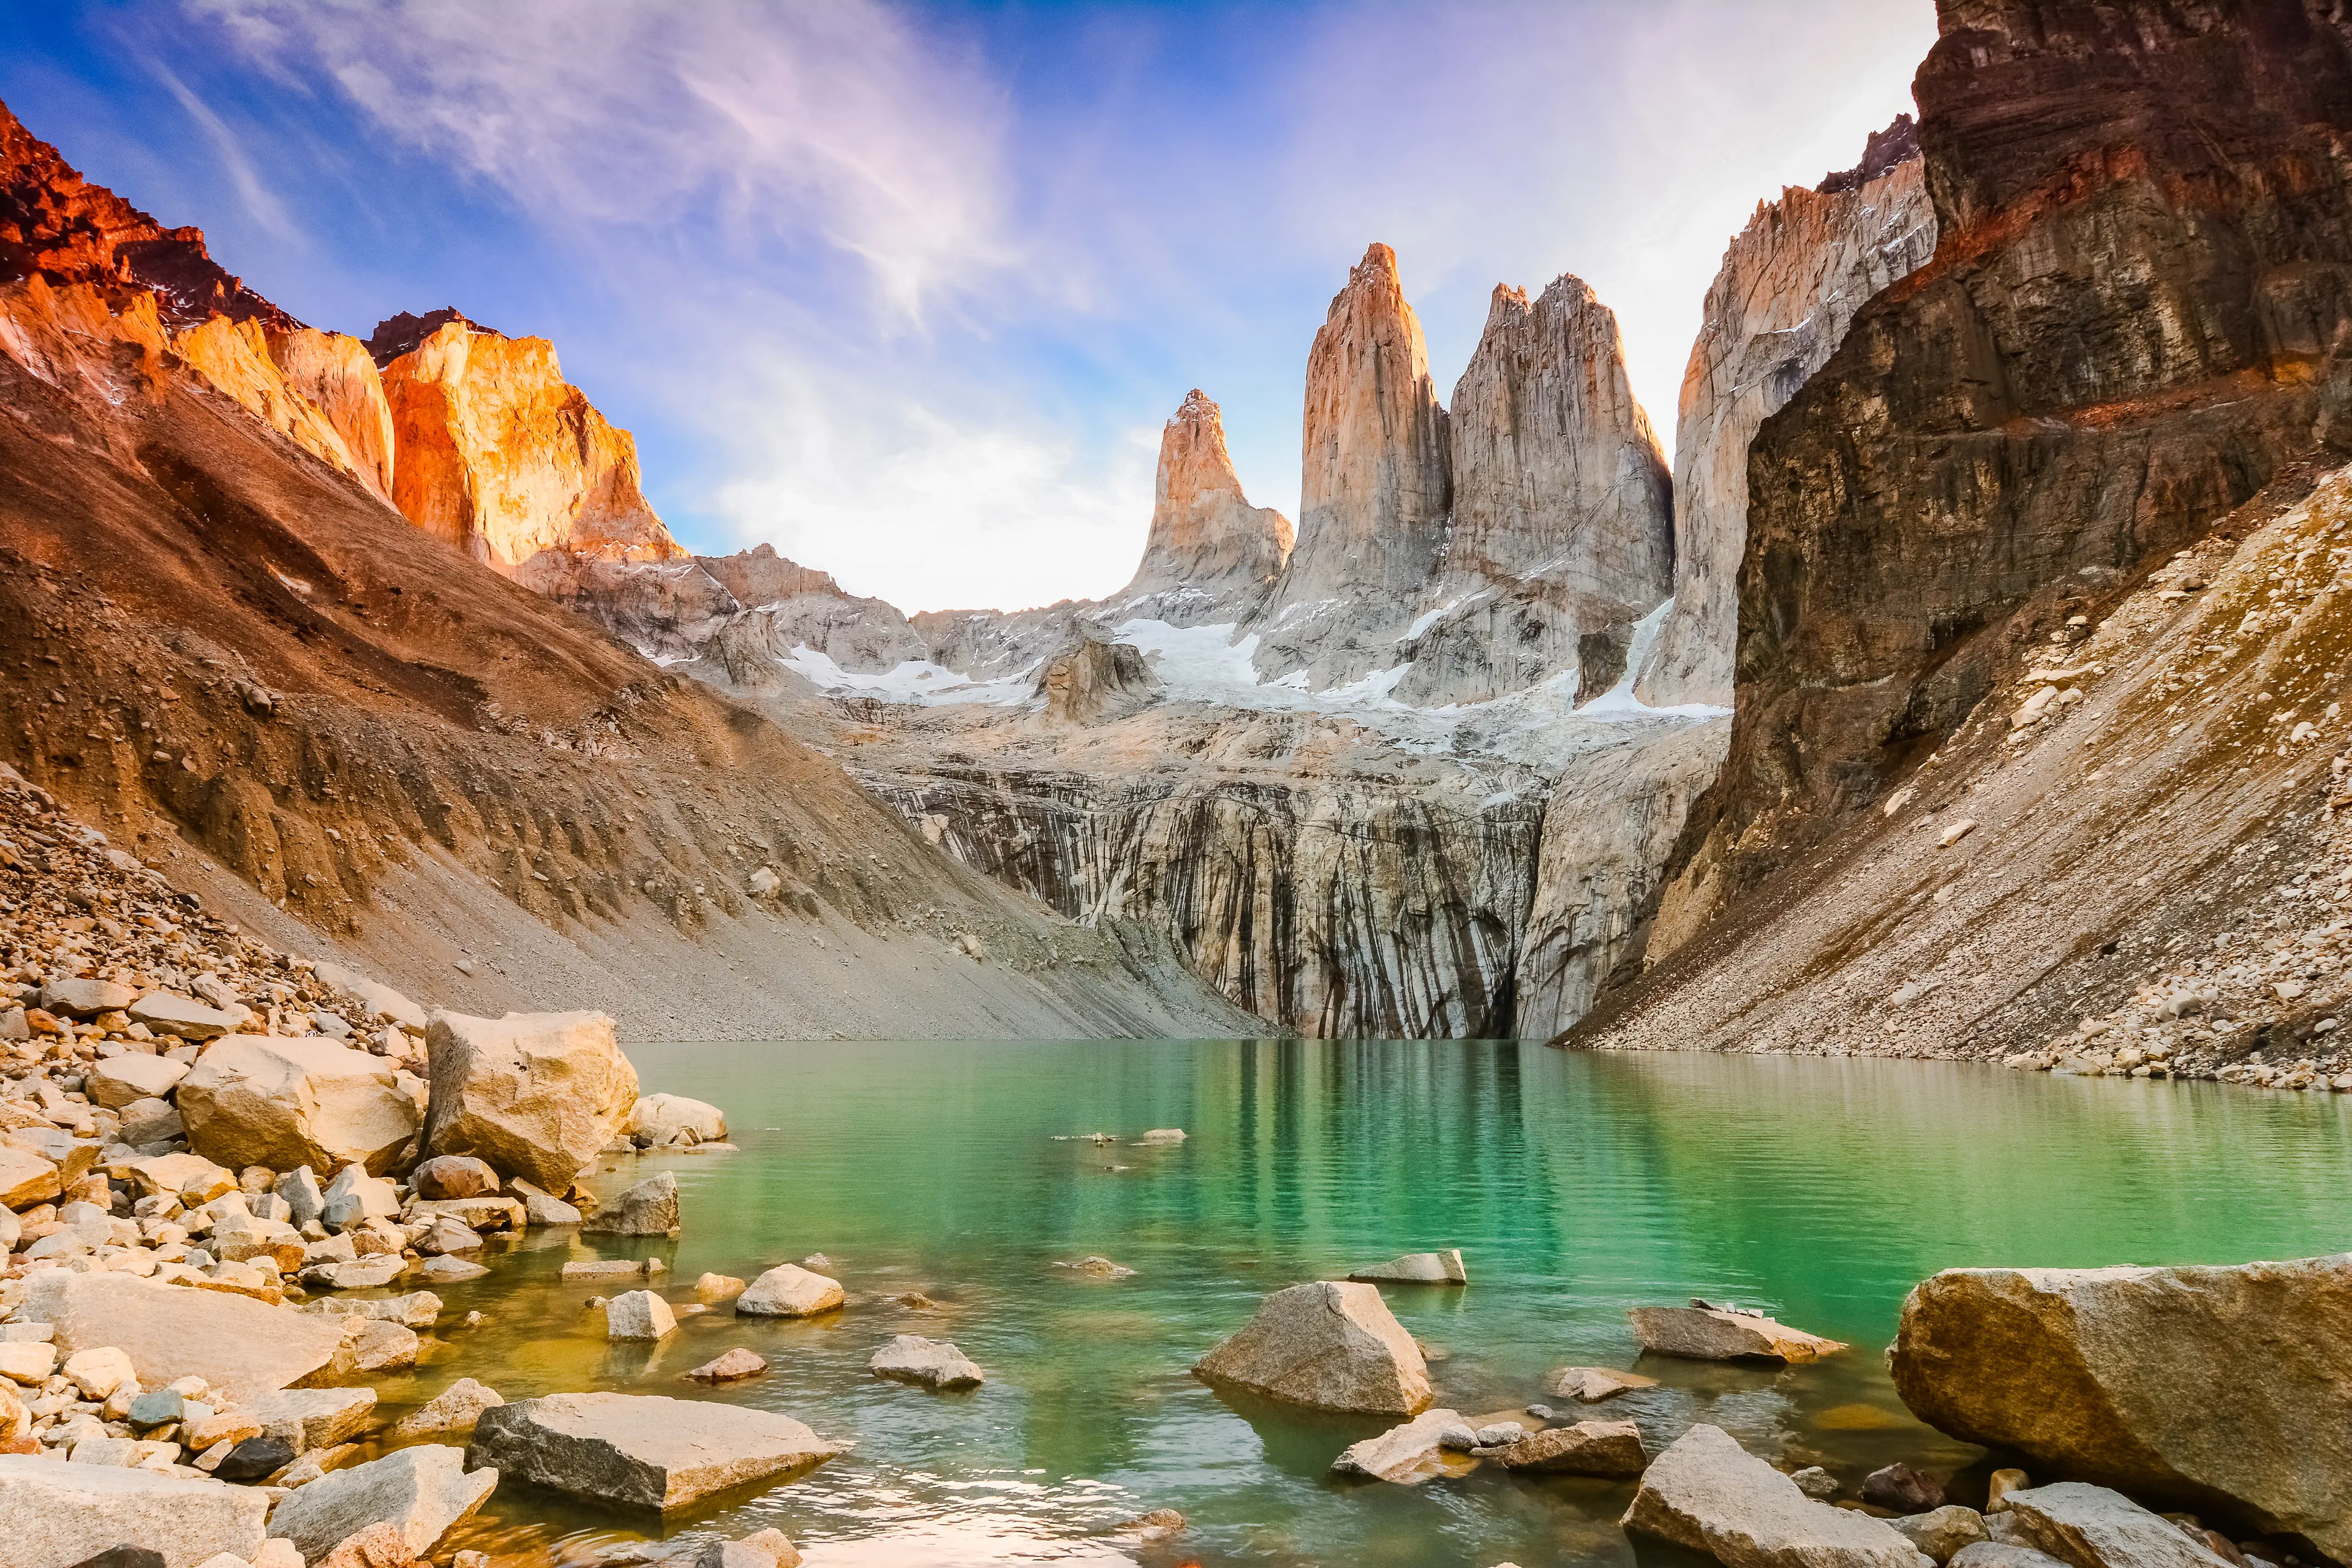 7-Day Local Adventure & Sightseeing Journey in Chilean Patagonia with Friends